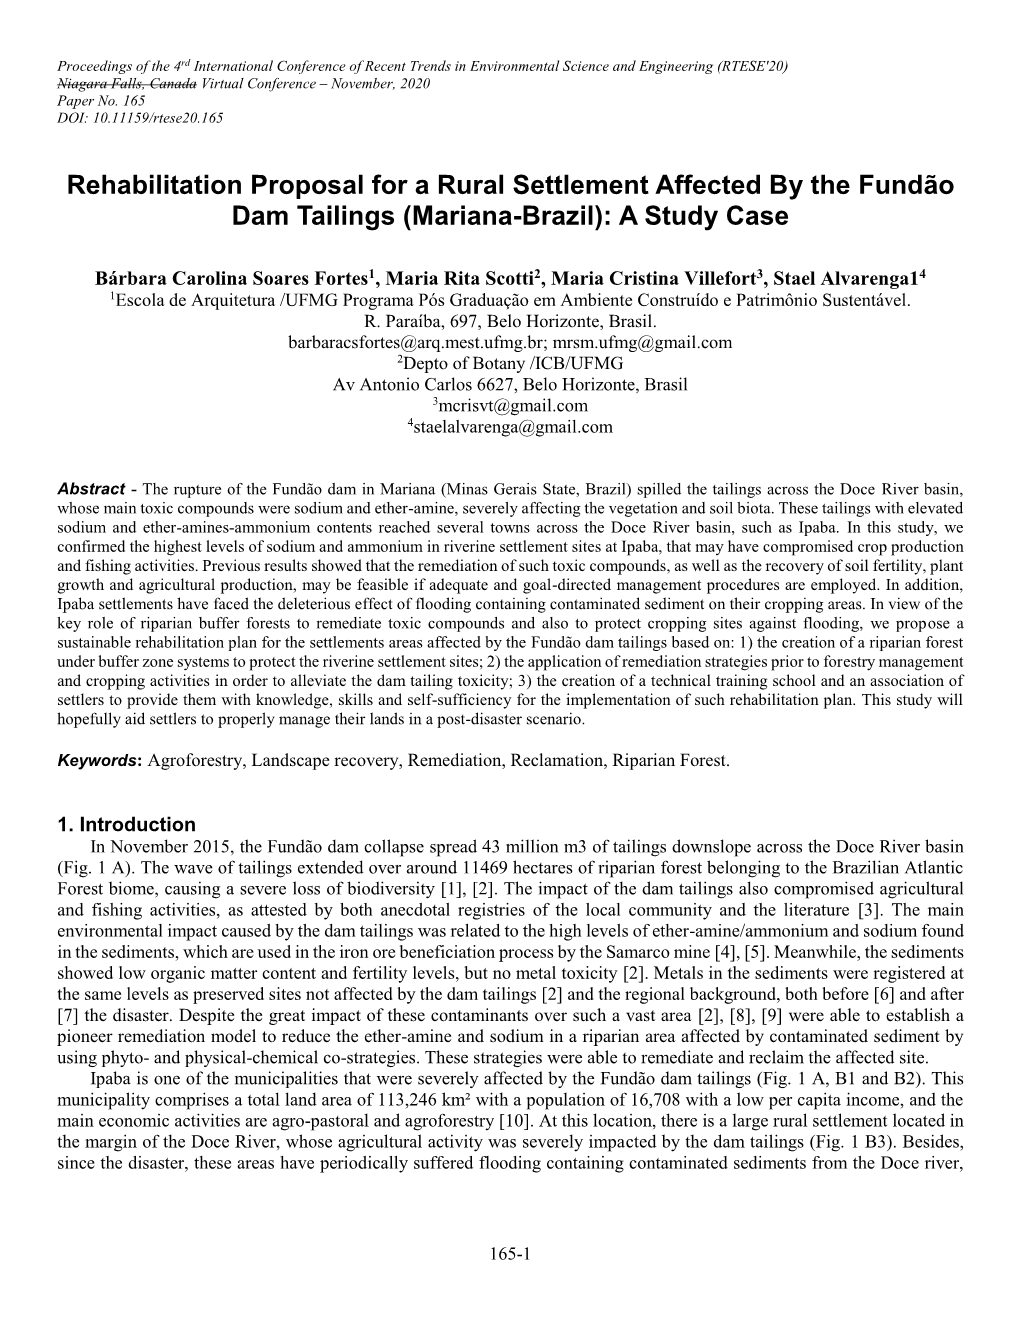 Rehabilitation Proposal for a Rural Settlement Affected by the Fundão Dam Tailings (Mariana-Brazil): a Study Case